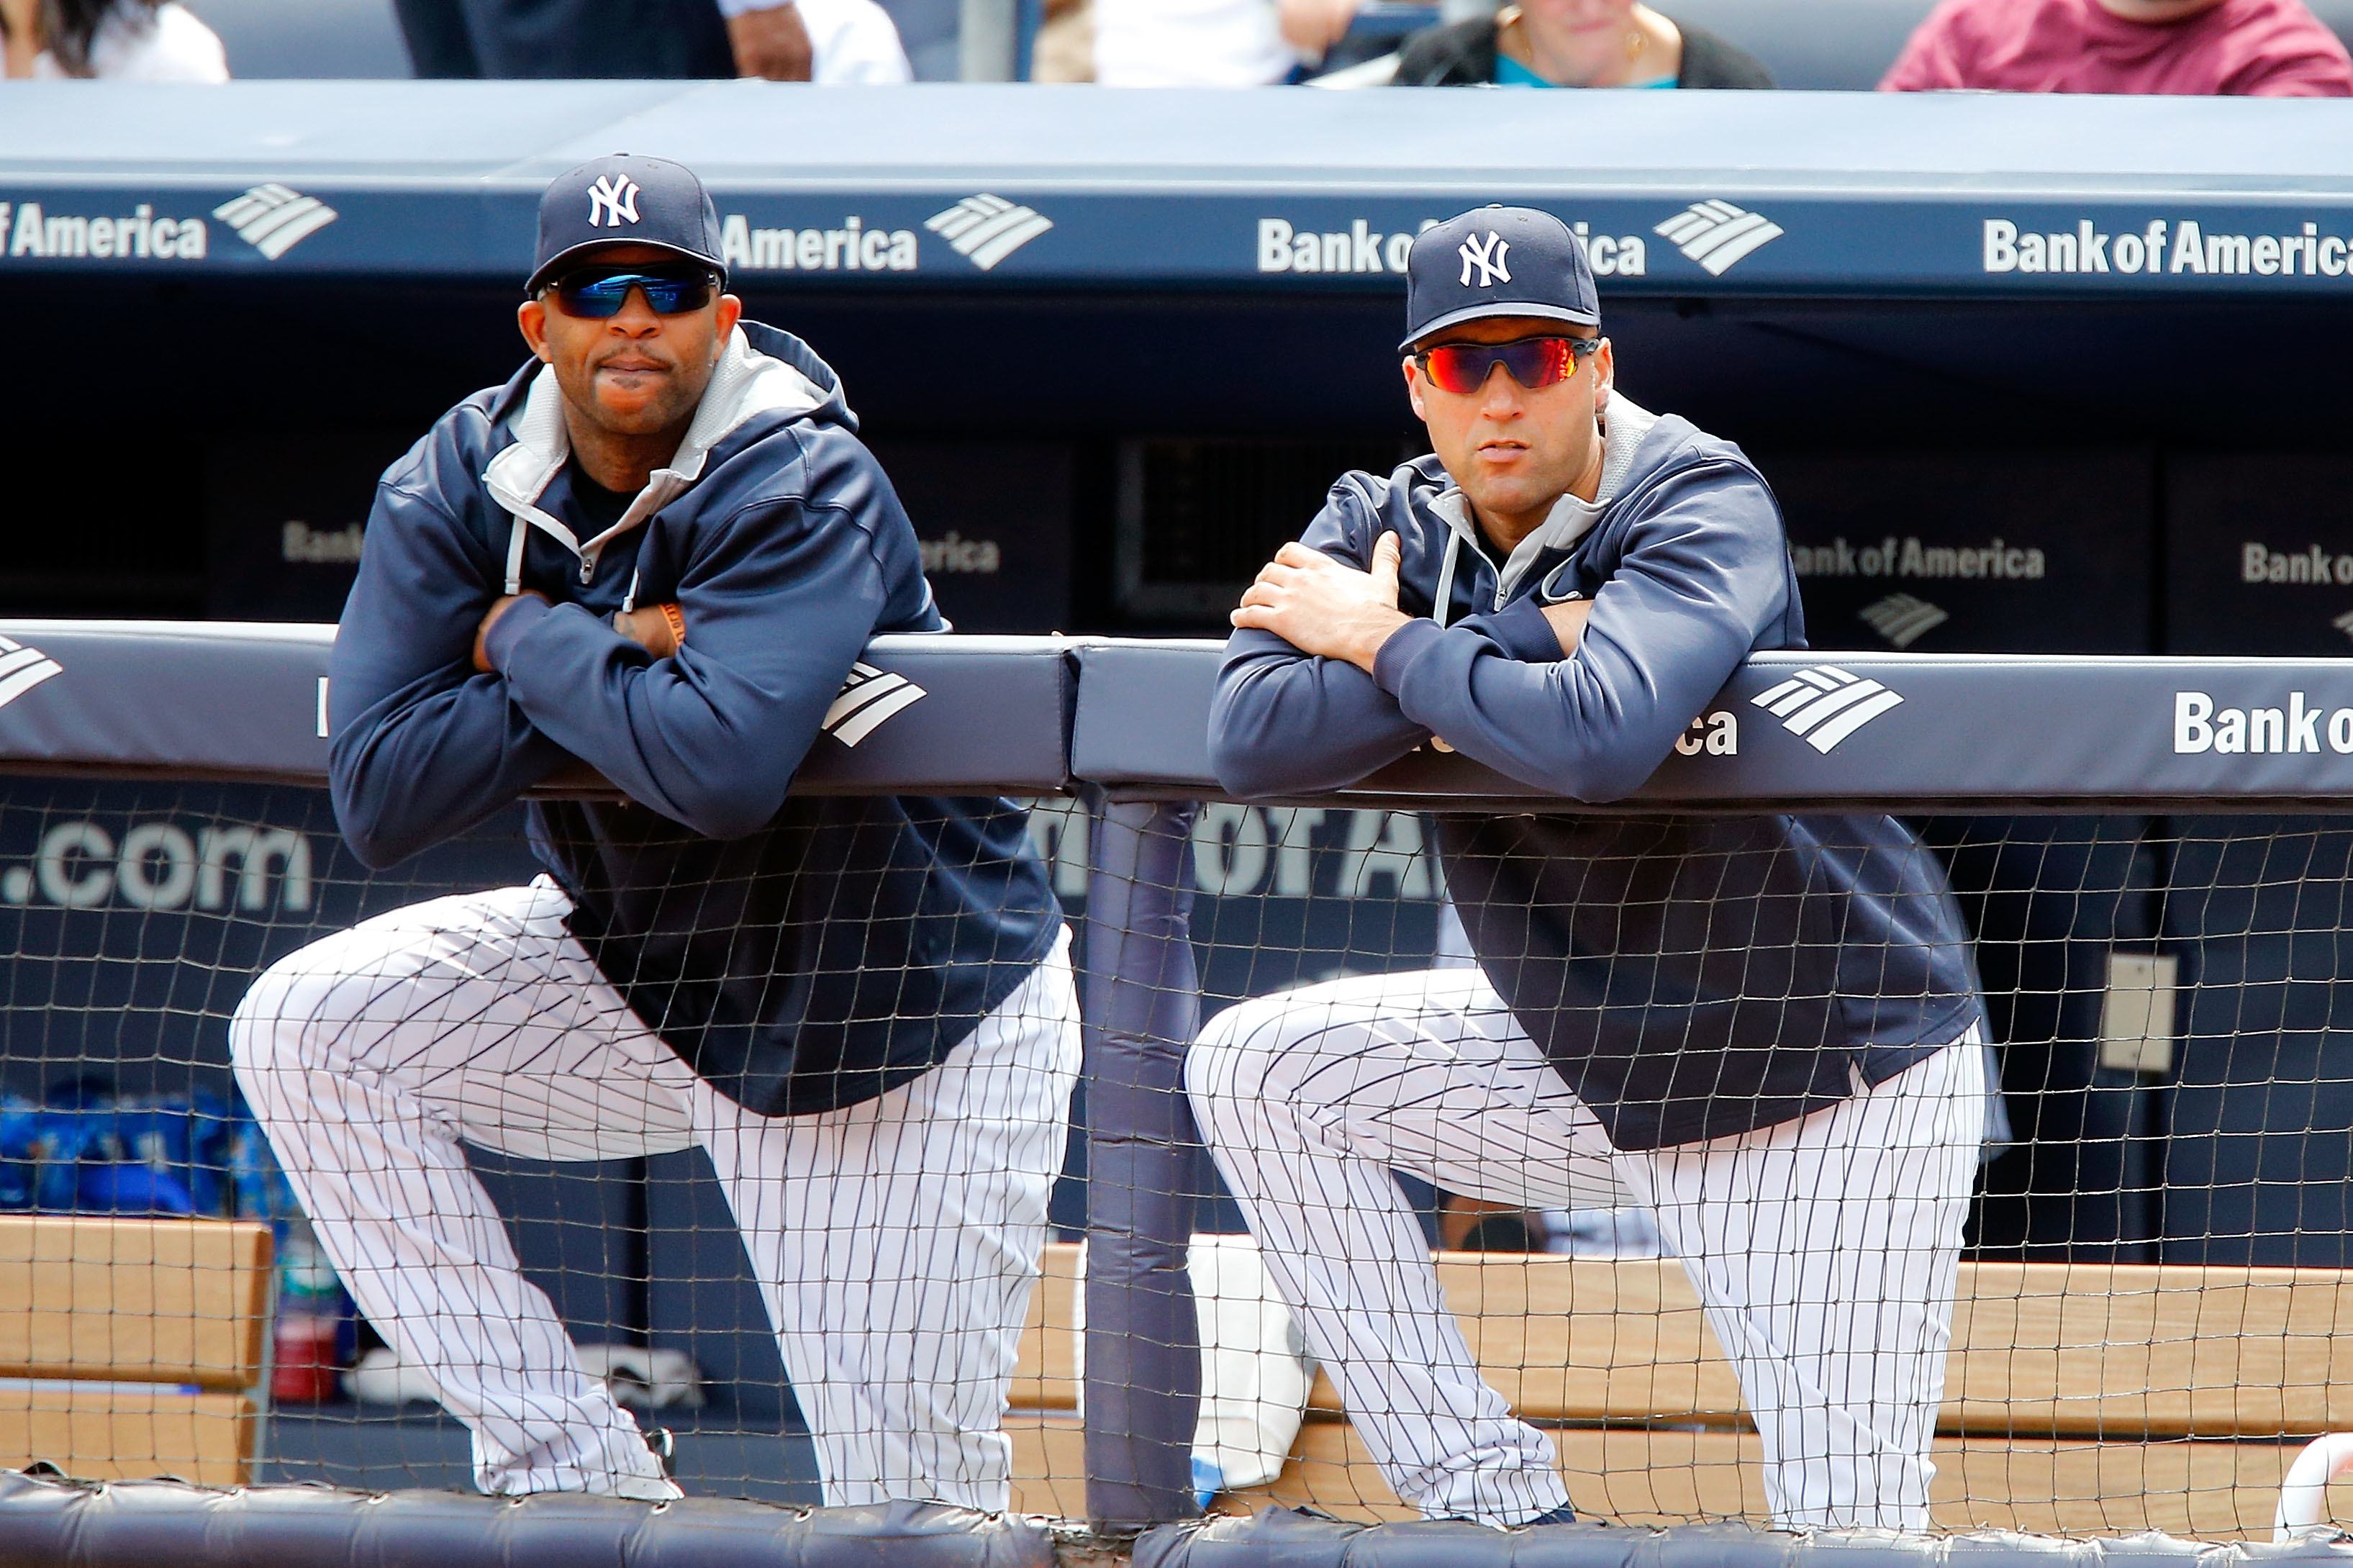 Done: Derek Jeter, Yankees agree to three-year contract - NBC Sports